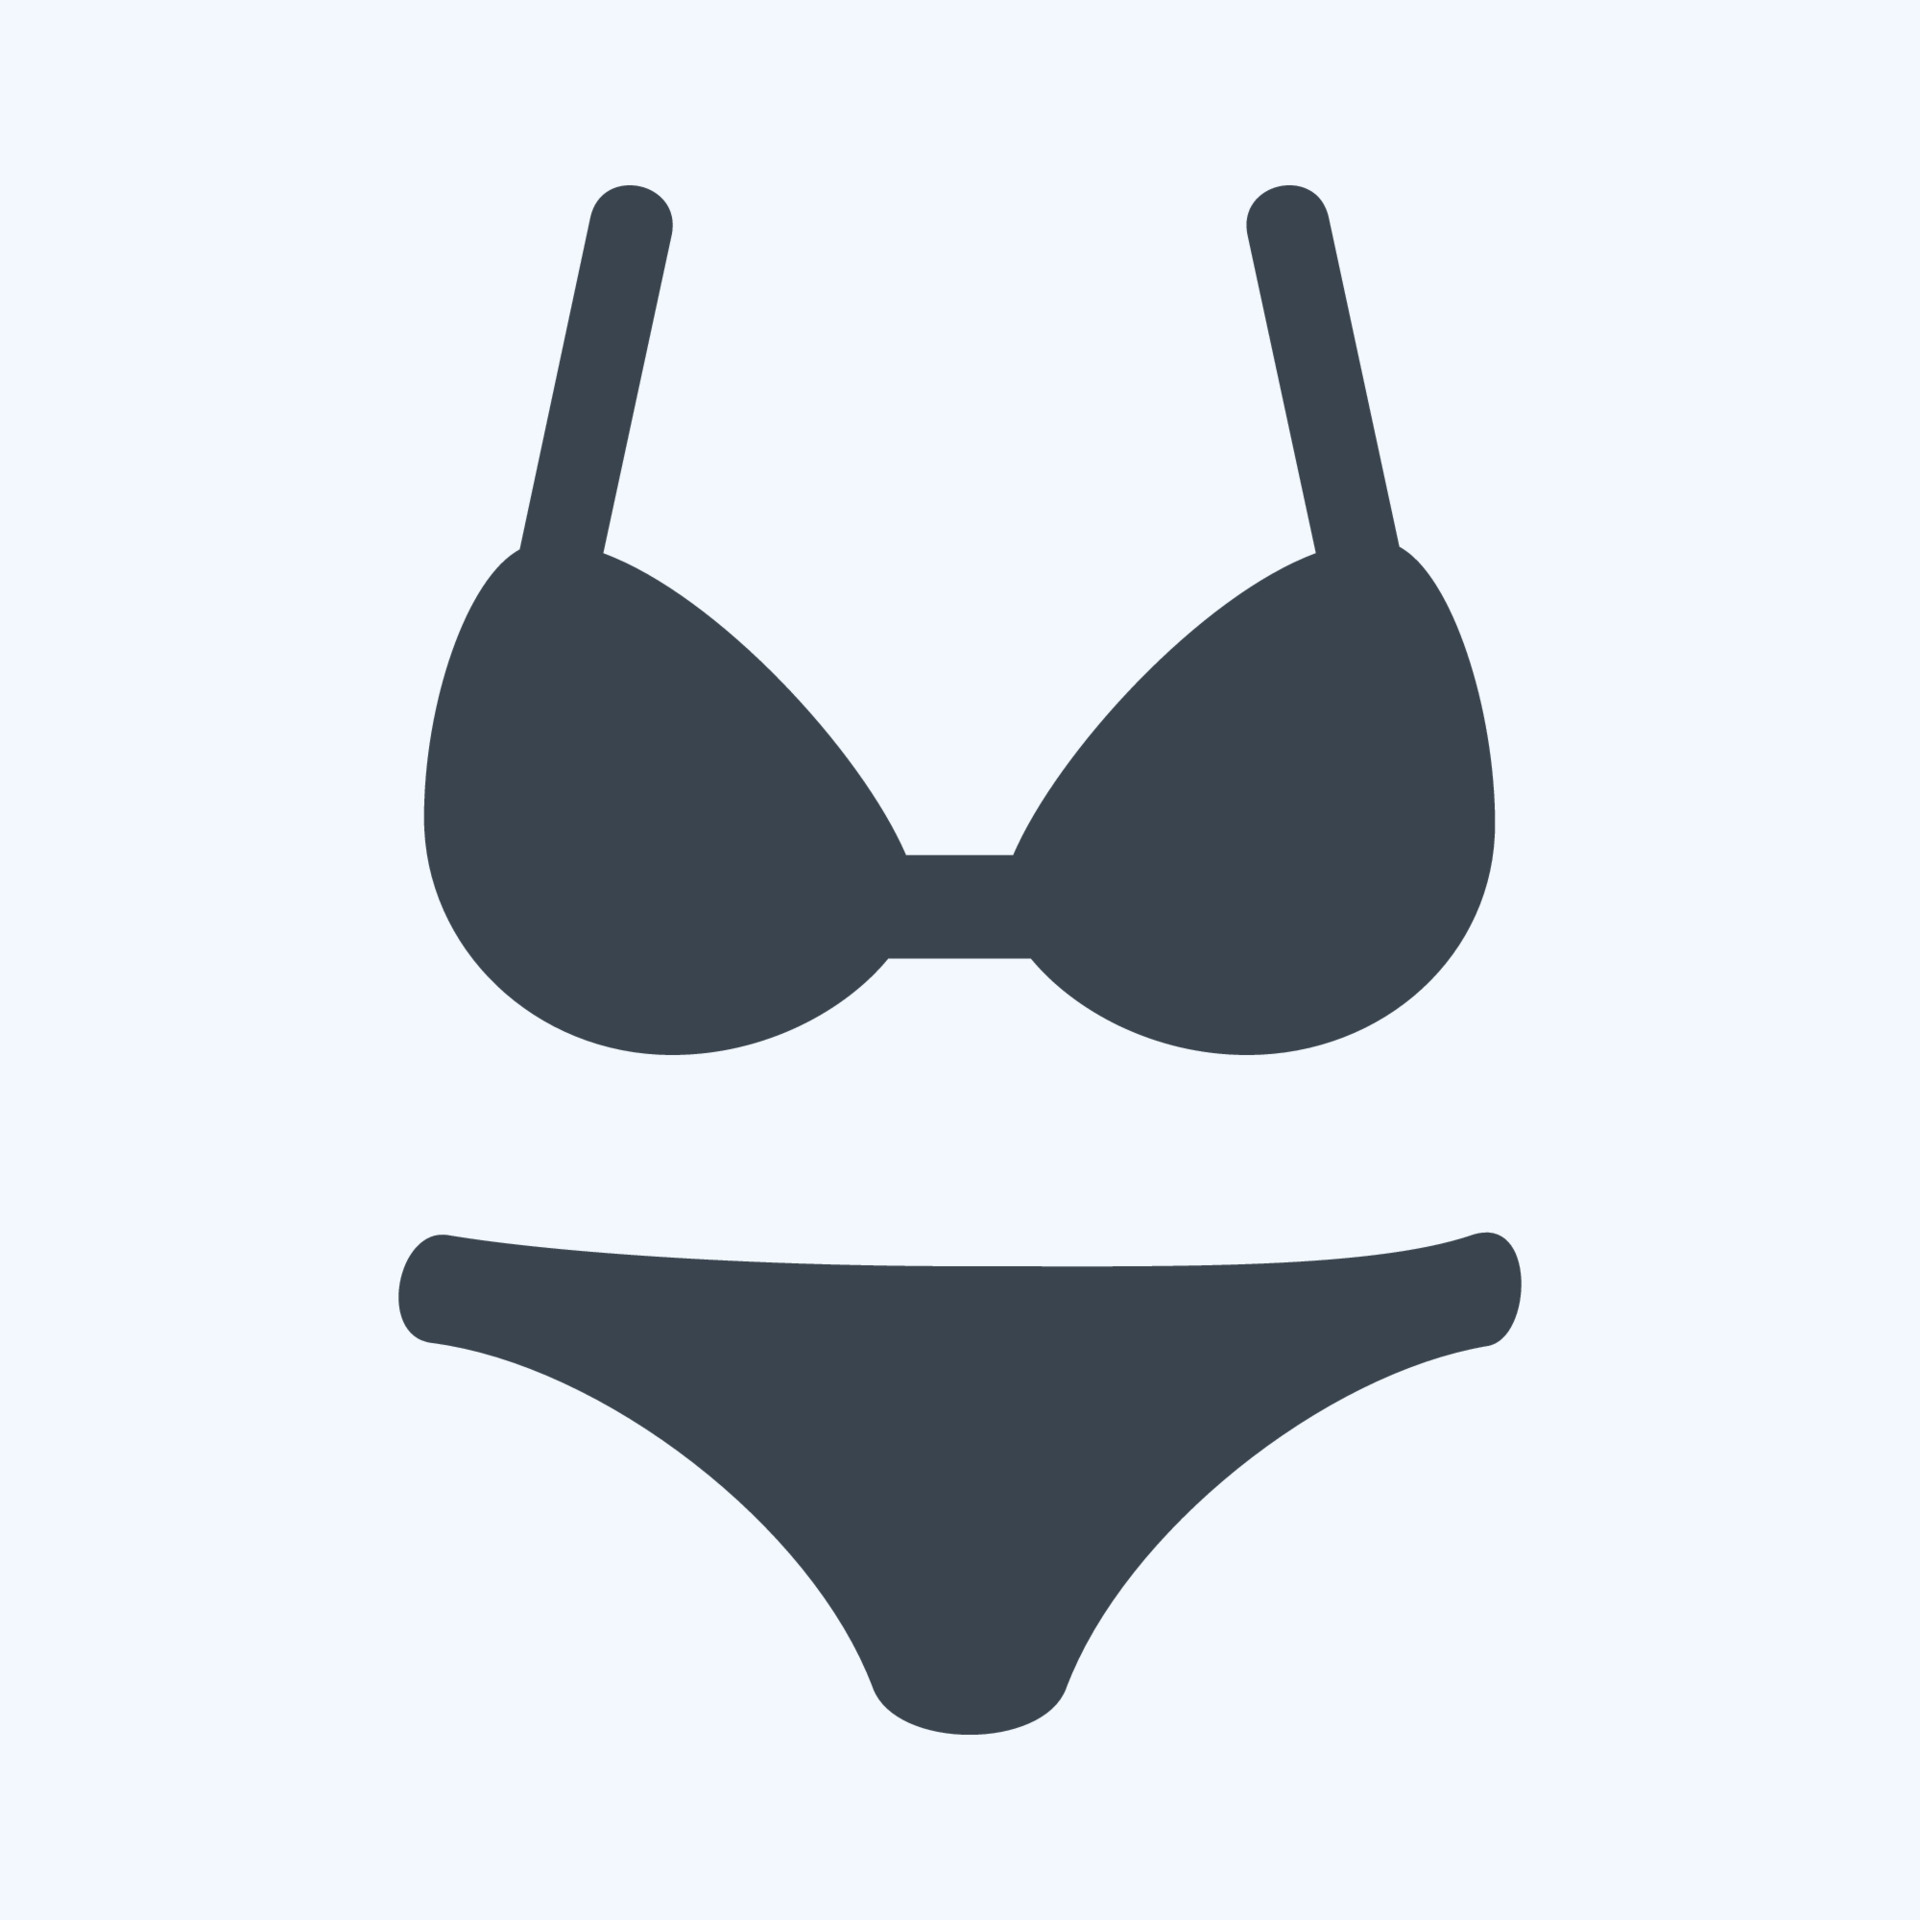 Panty Icons - Free SVG & PNG Panty Images - Noun Project